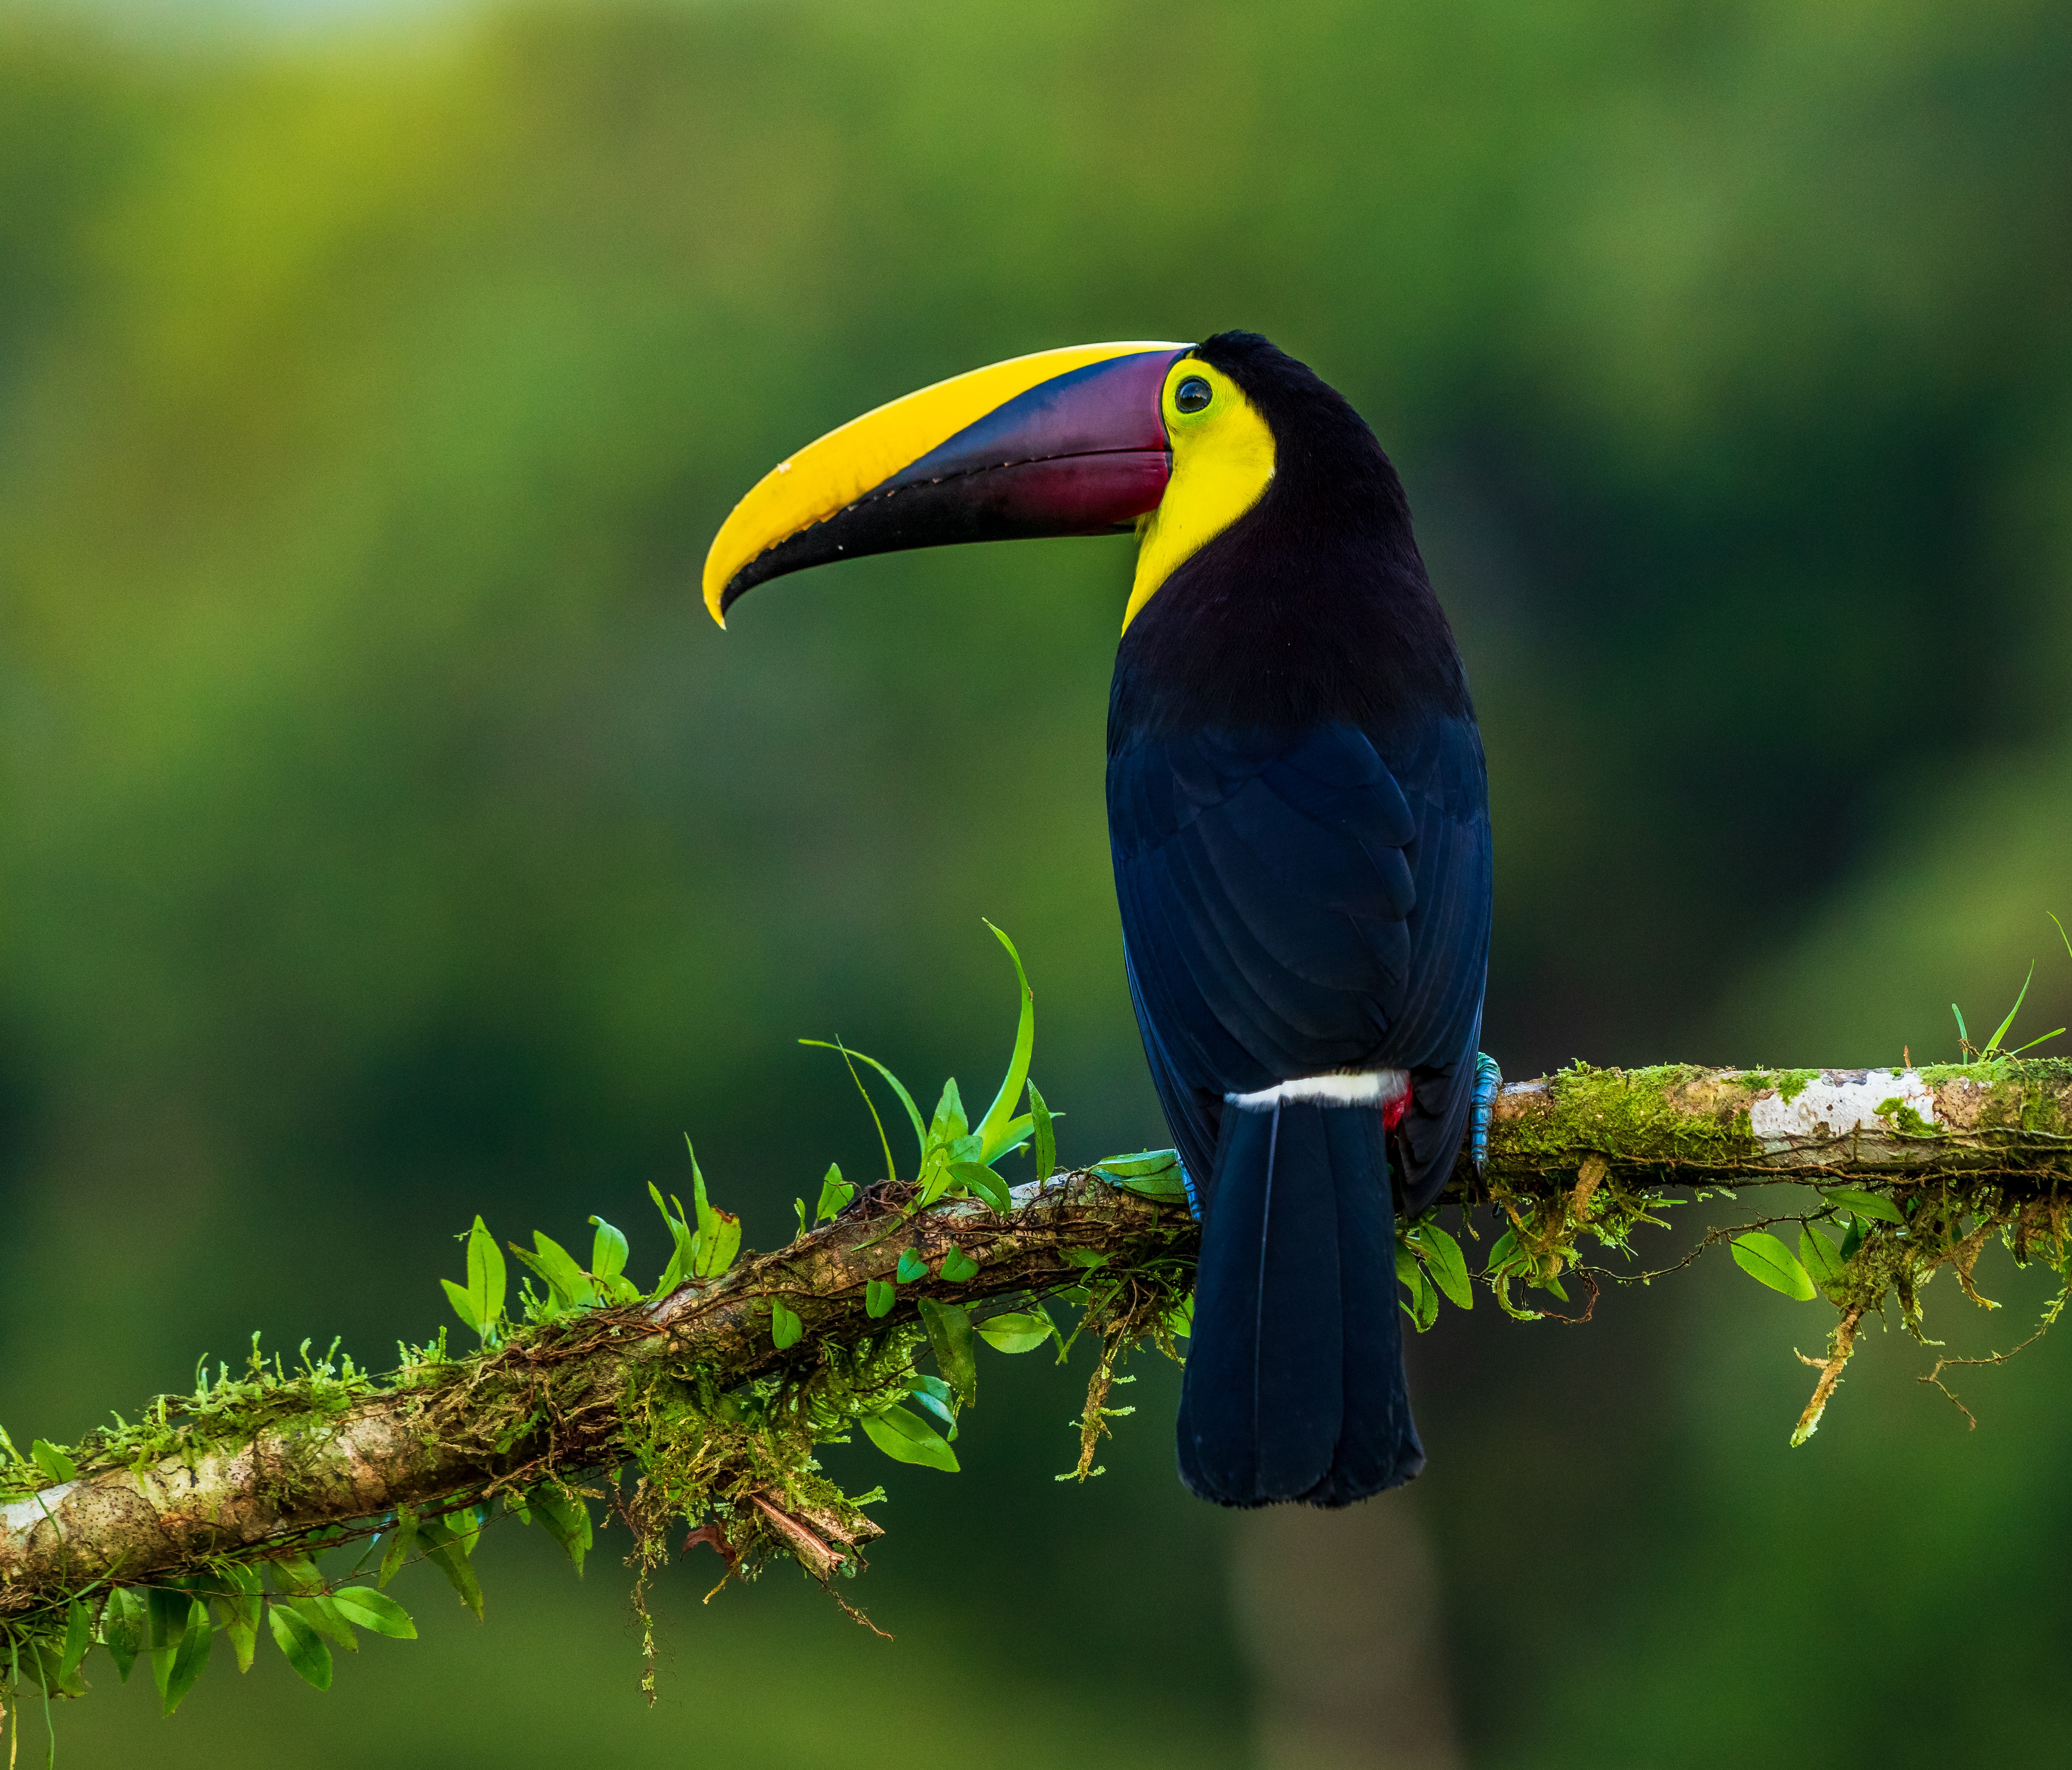 Toucan on a Branch